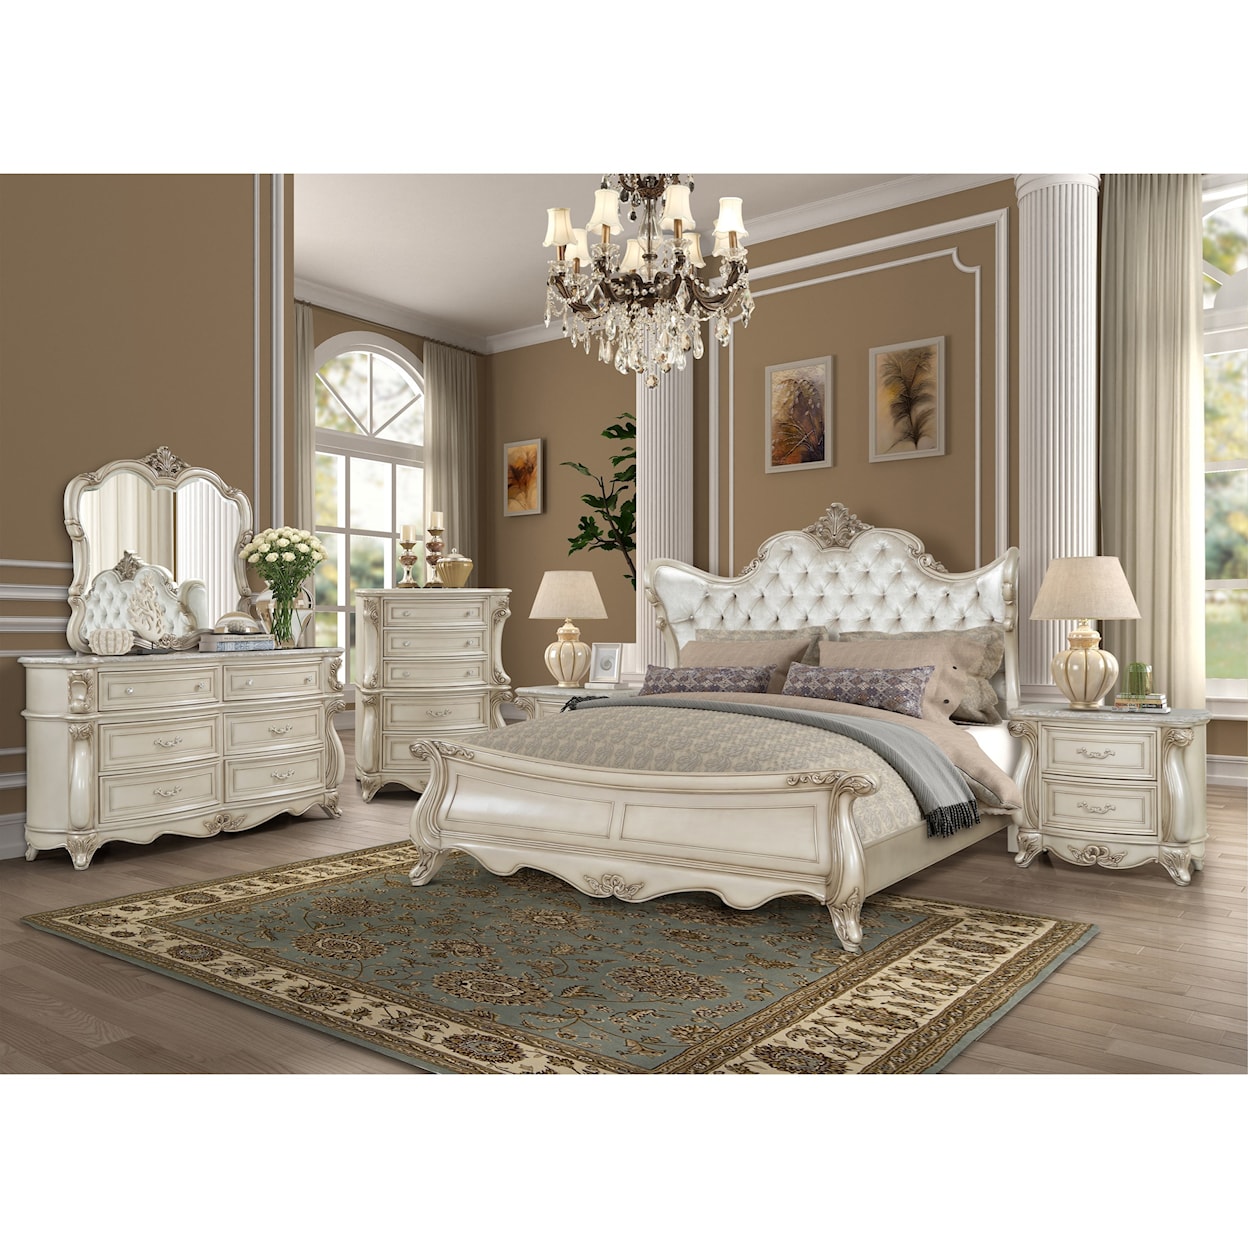 New Classic Furniture Monique King Bed